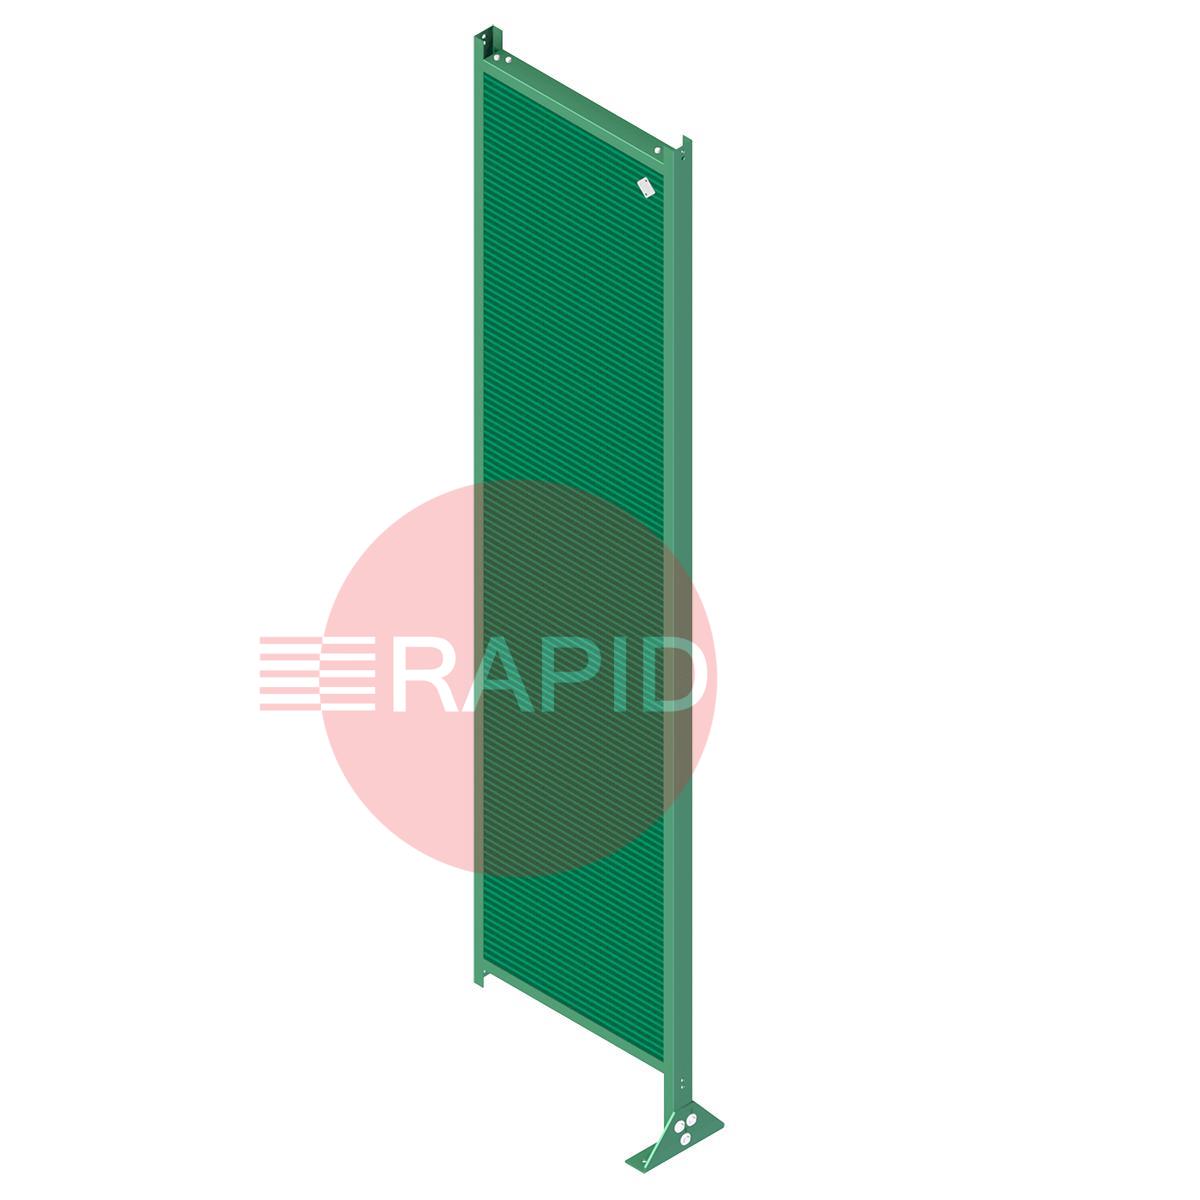 45.00.00.2005  CEPRO Sonic Sound Acoustic Green Wall Screen, H - 201cm x W - 51cm